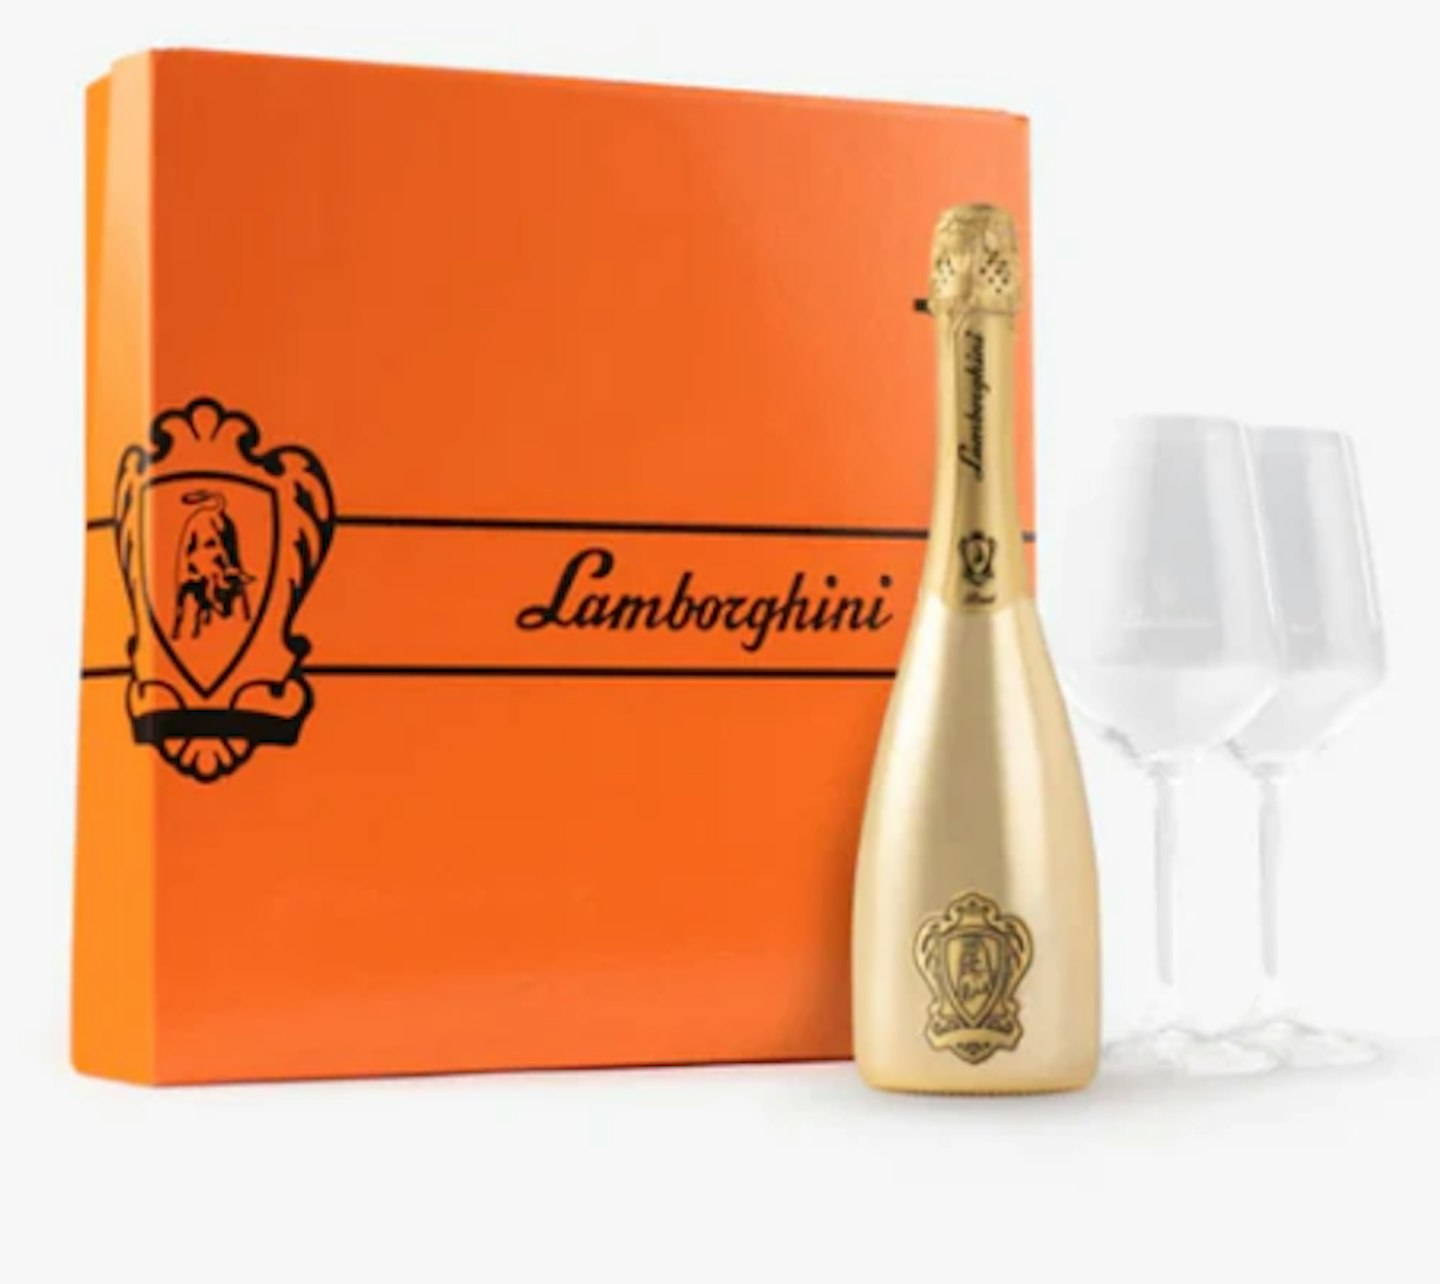 Lamborghini Gold Brut Sparkling Wine Gift Set with two Crystal Glasses